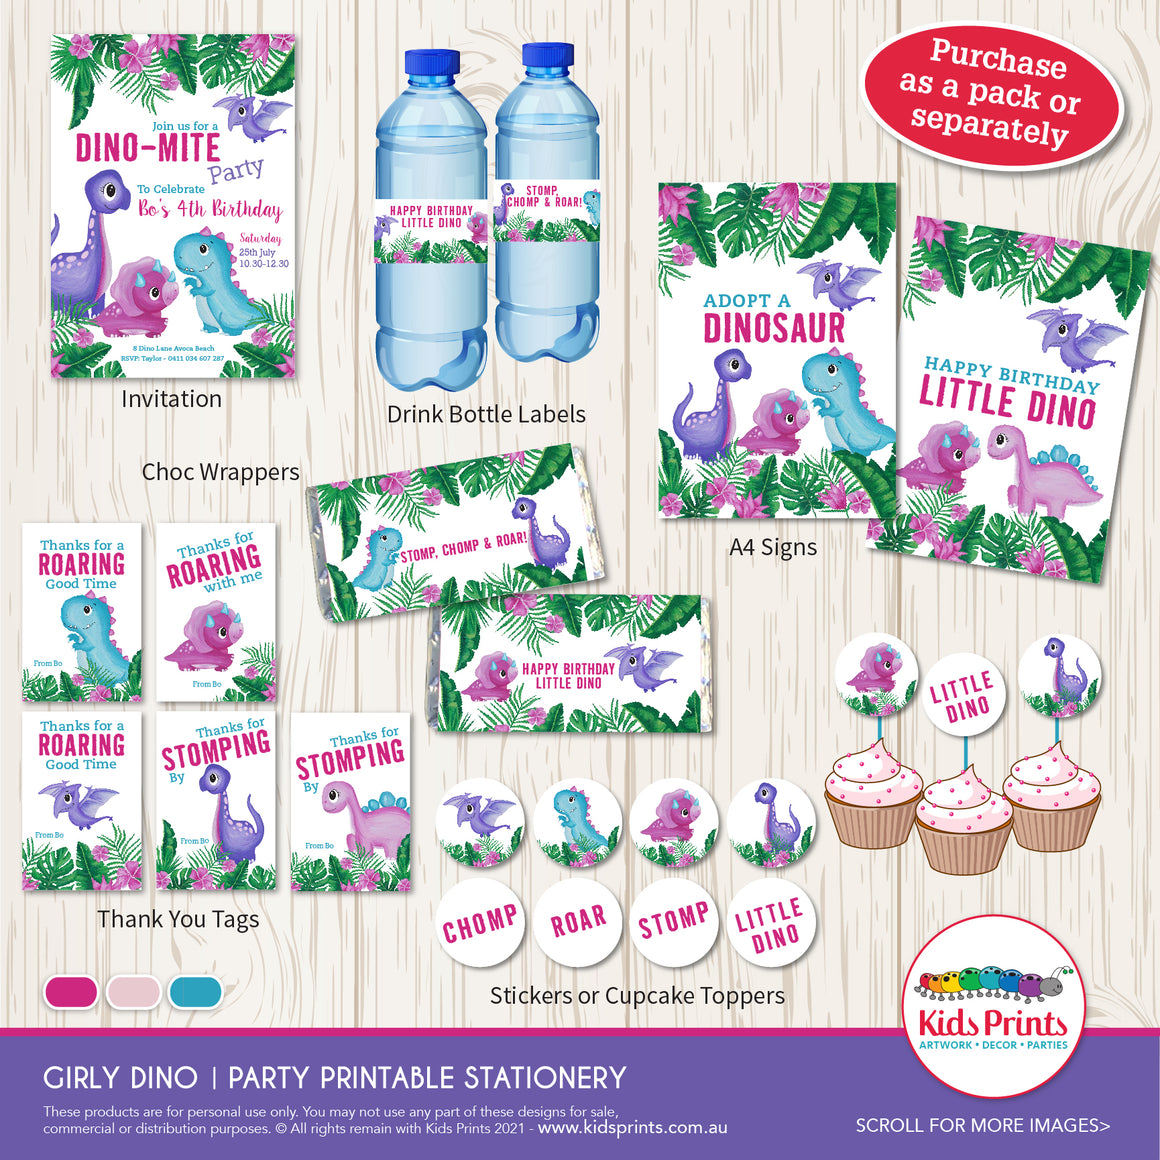 Little Dino Party Pack | Kids Prints